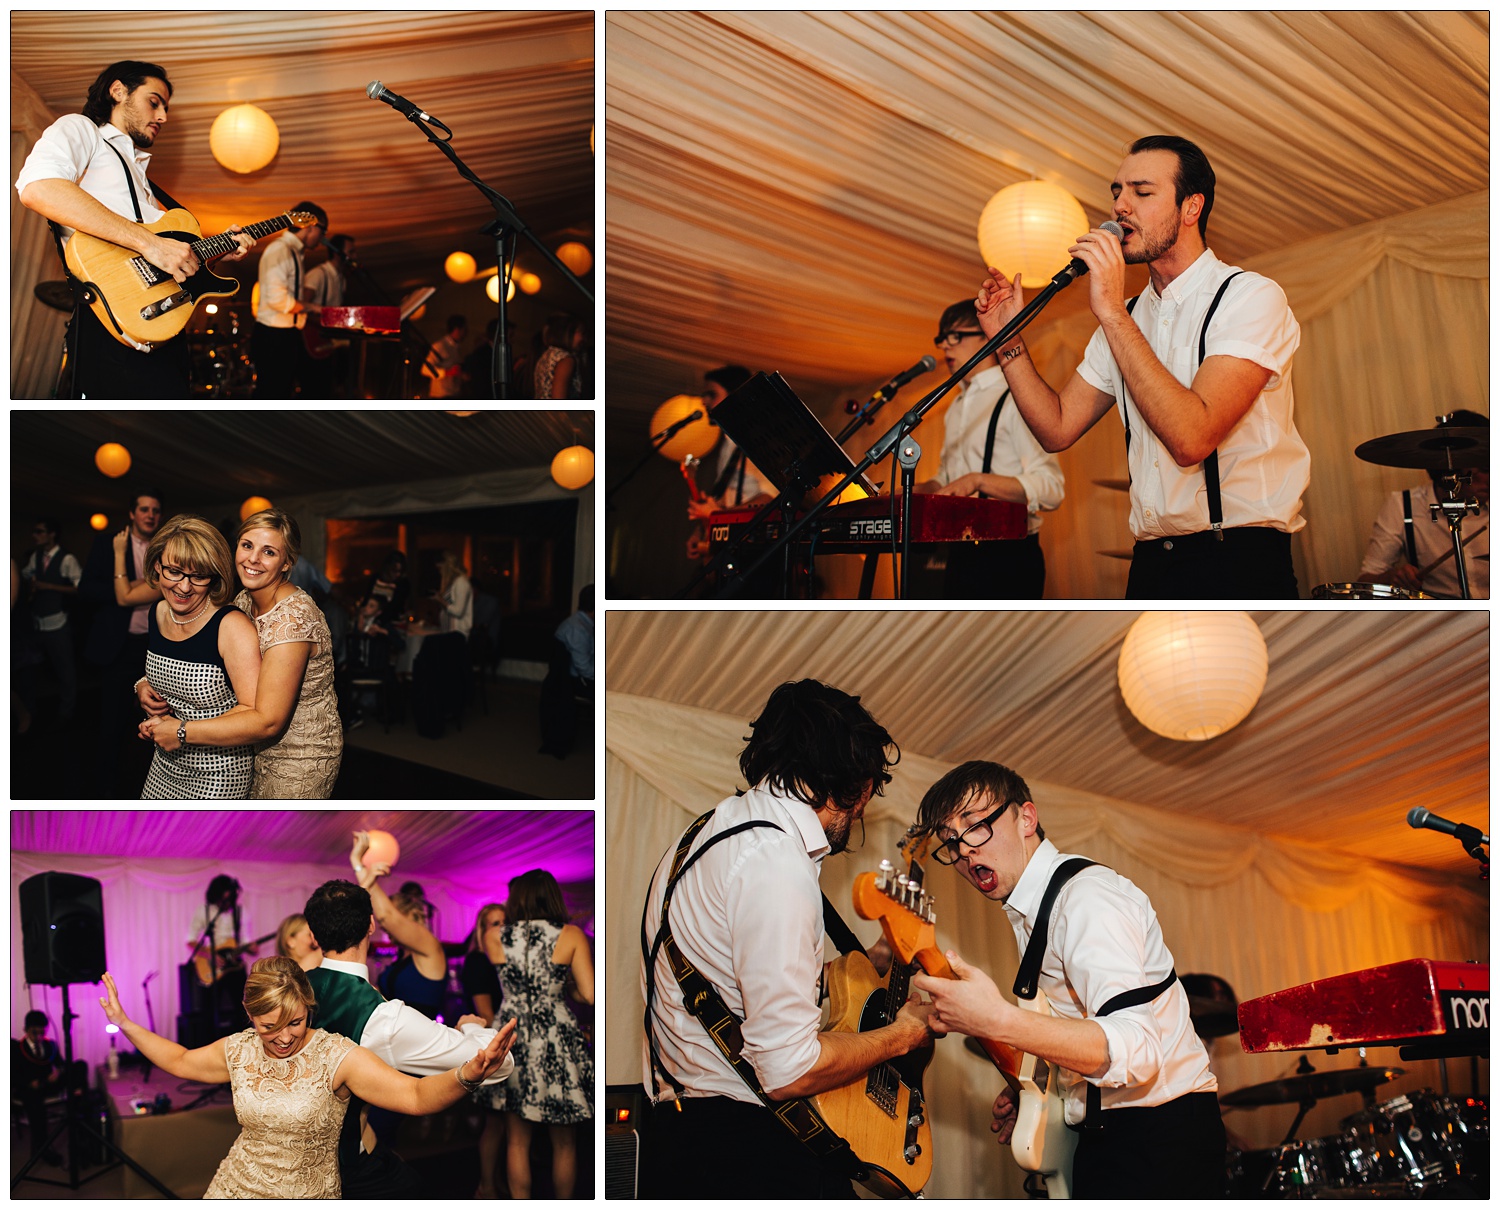 Winston and the Lads performing at a wedding reception. The lights are orange.